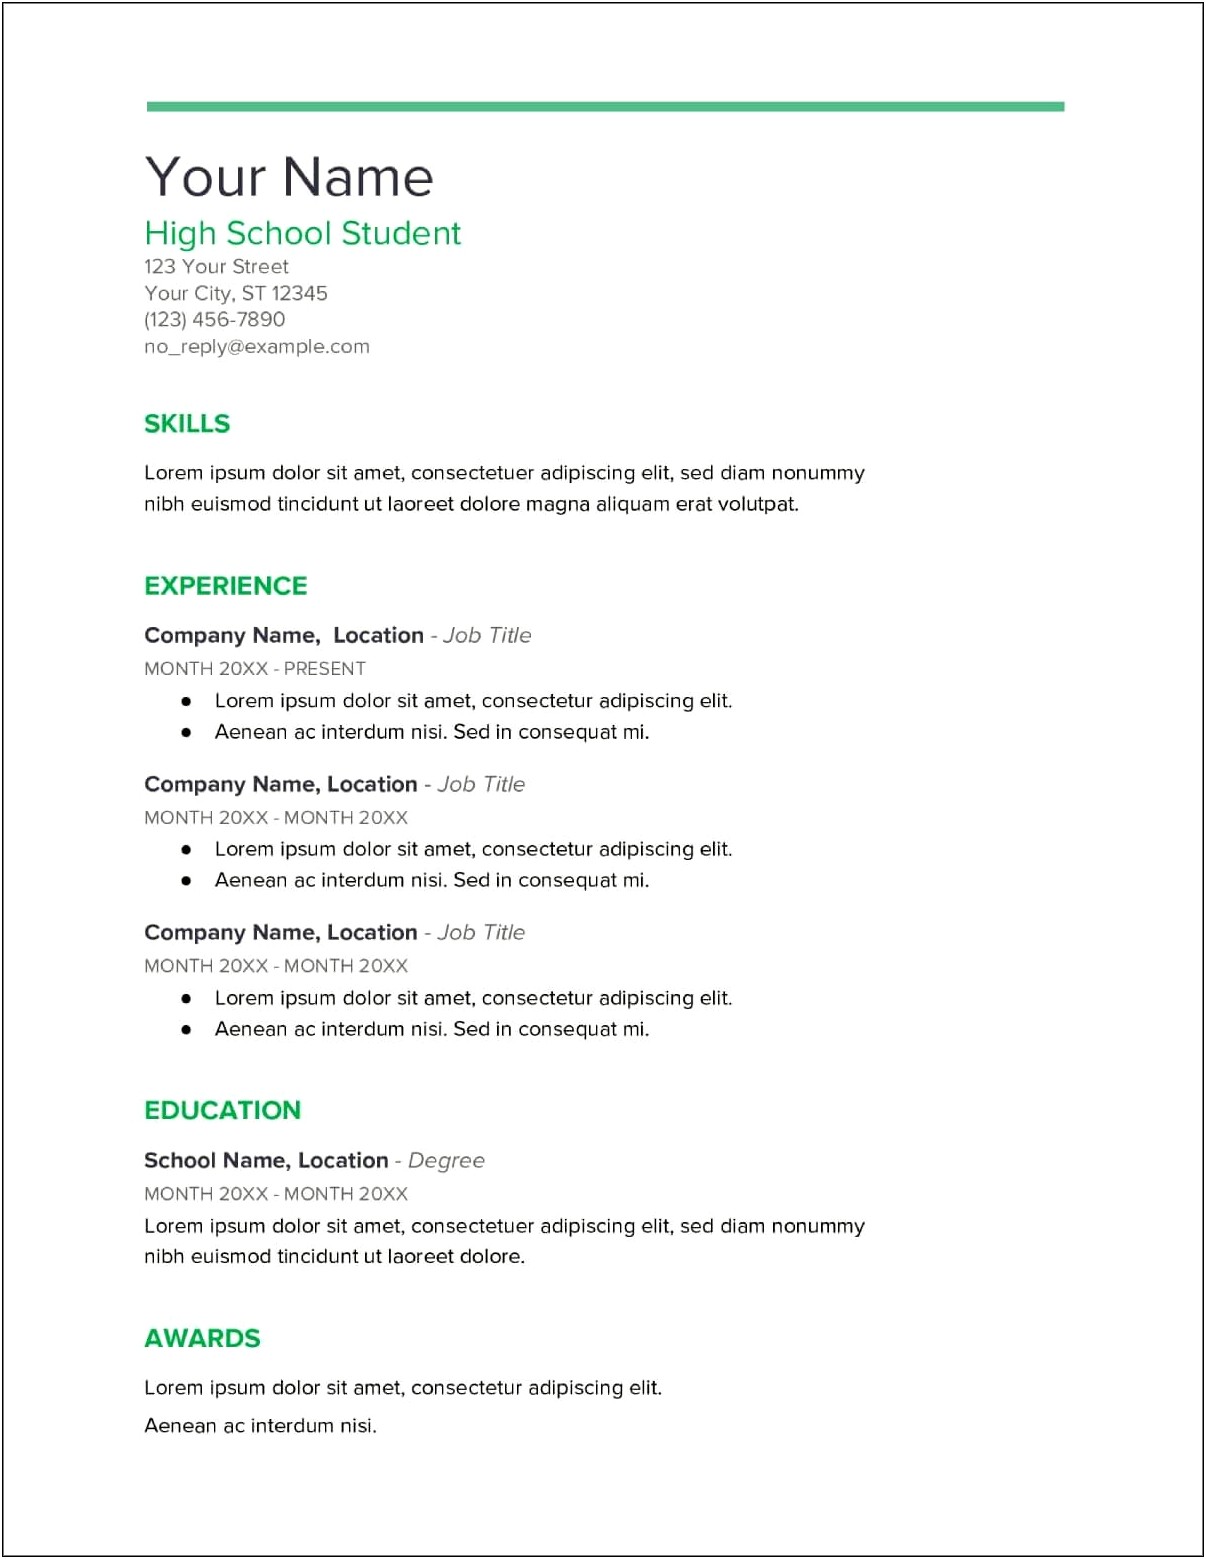 Resume Templates Free For High School Students